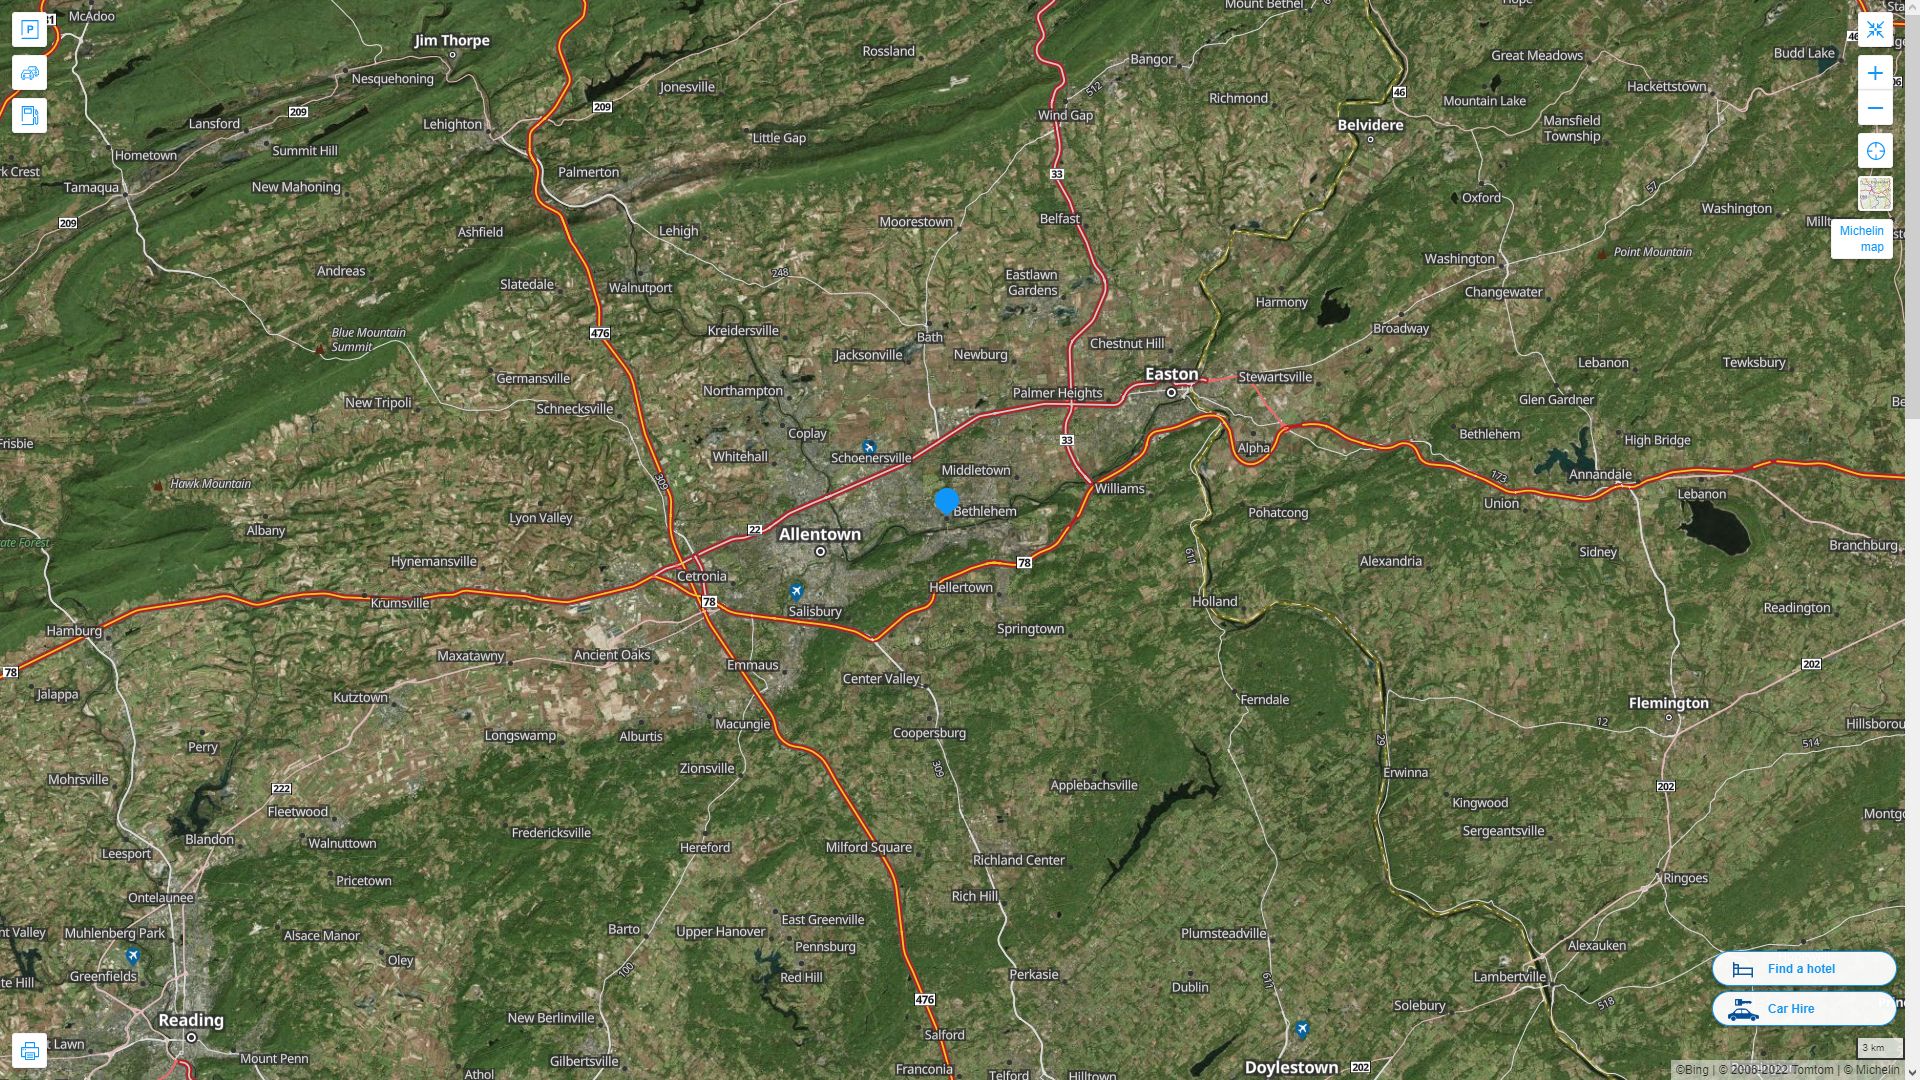 Bethlehem Pennsylvania Highway and Road Map with Satellite View